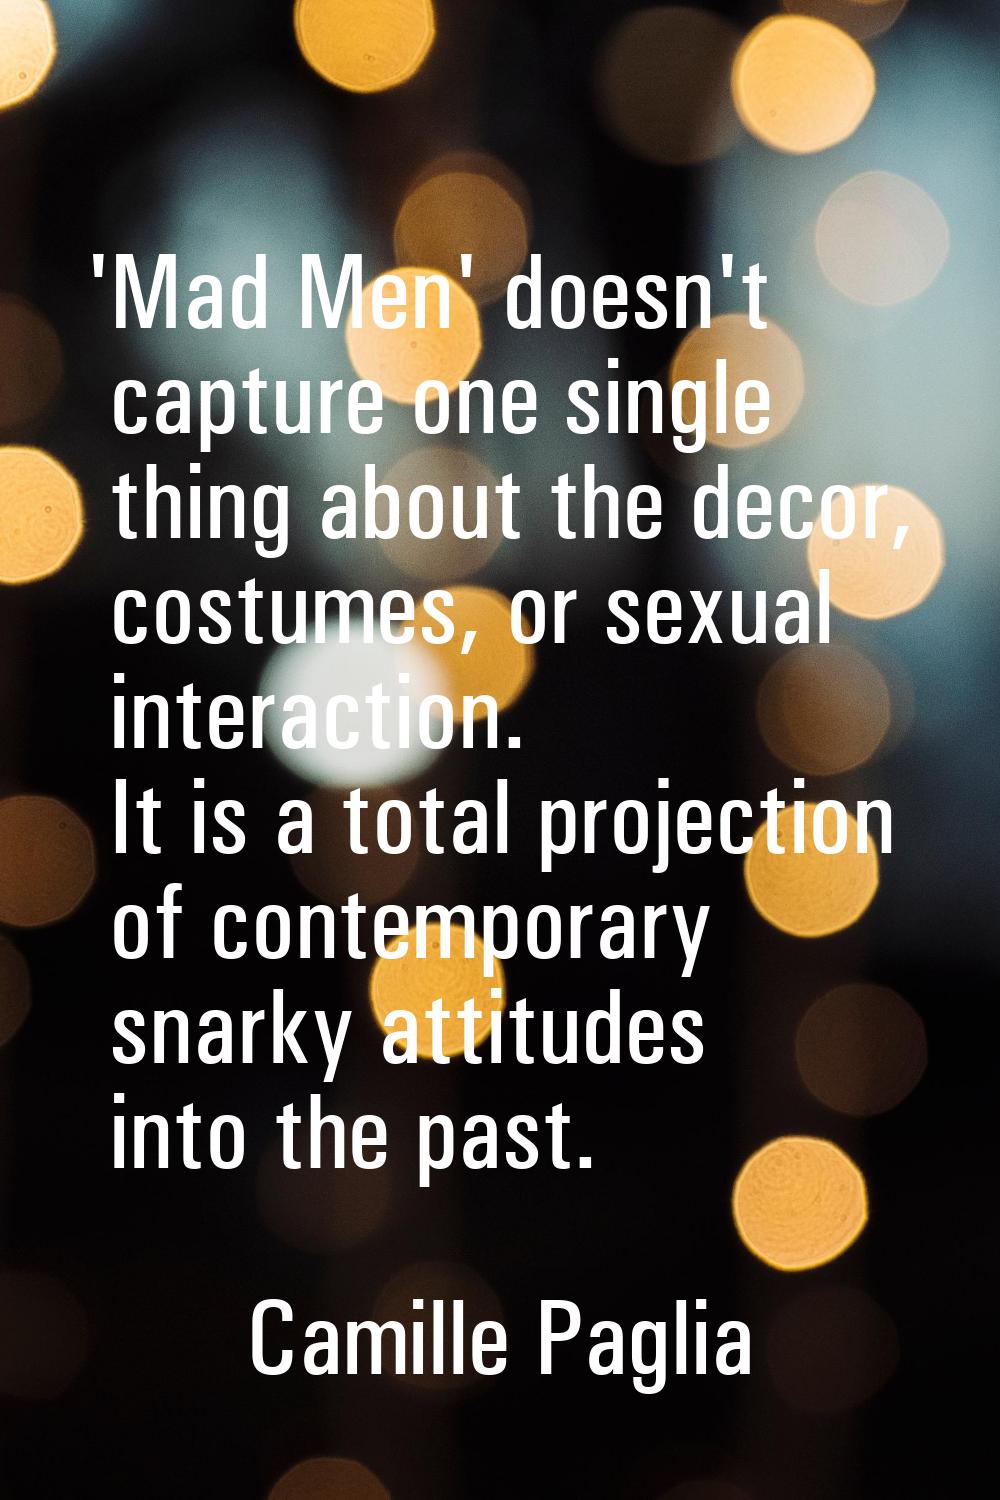 'Mad Men' doesn't capture one single thing about the decor, costumes, or sexual interaction. It is 